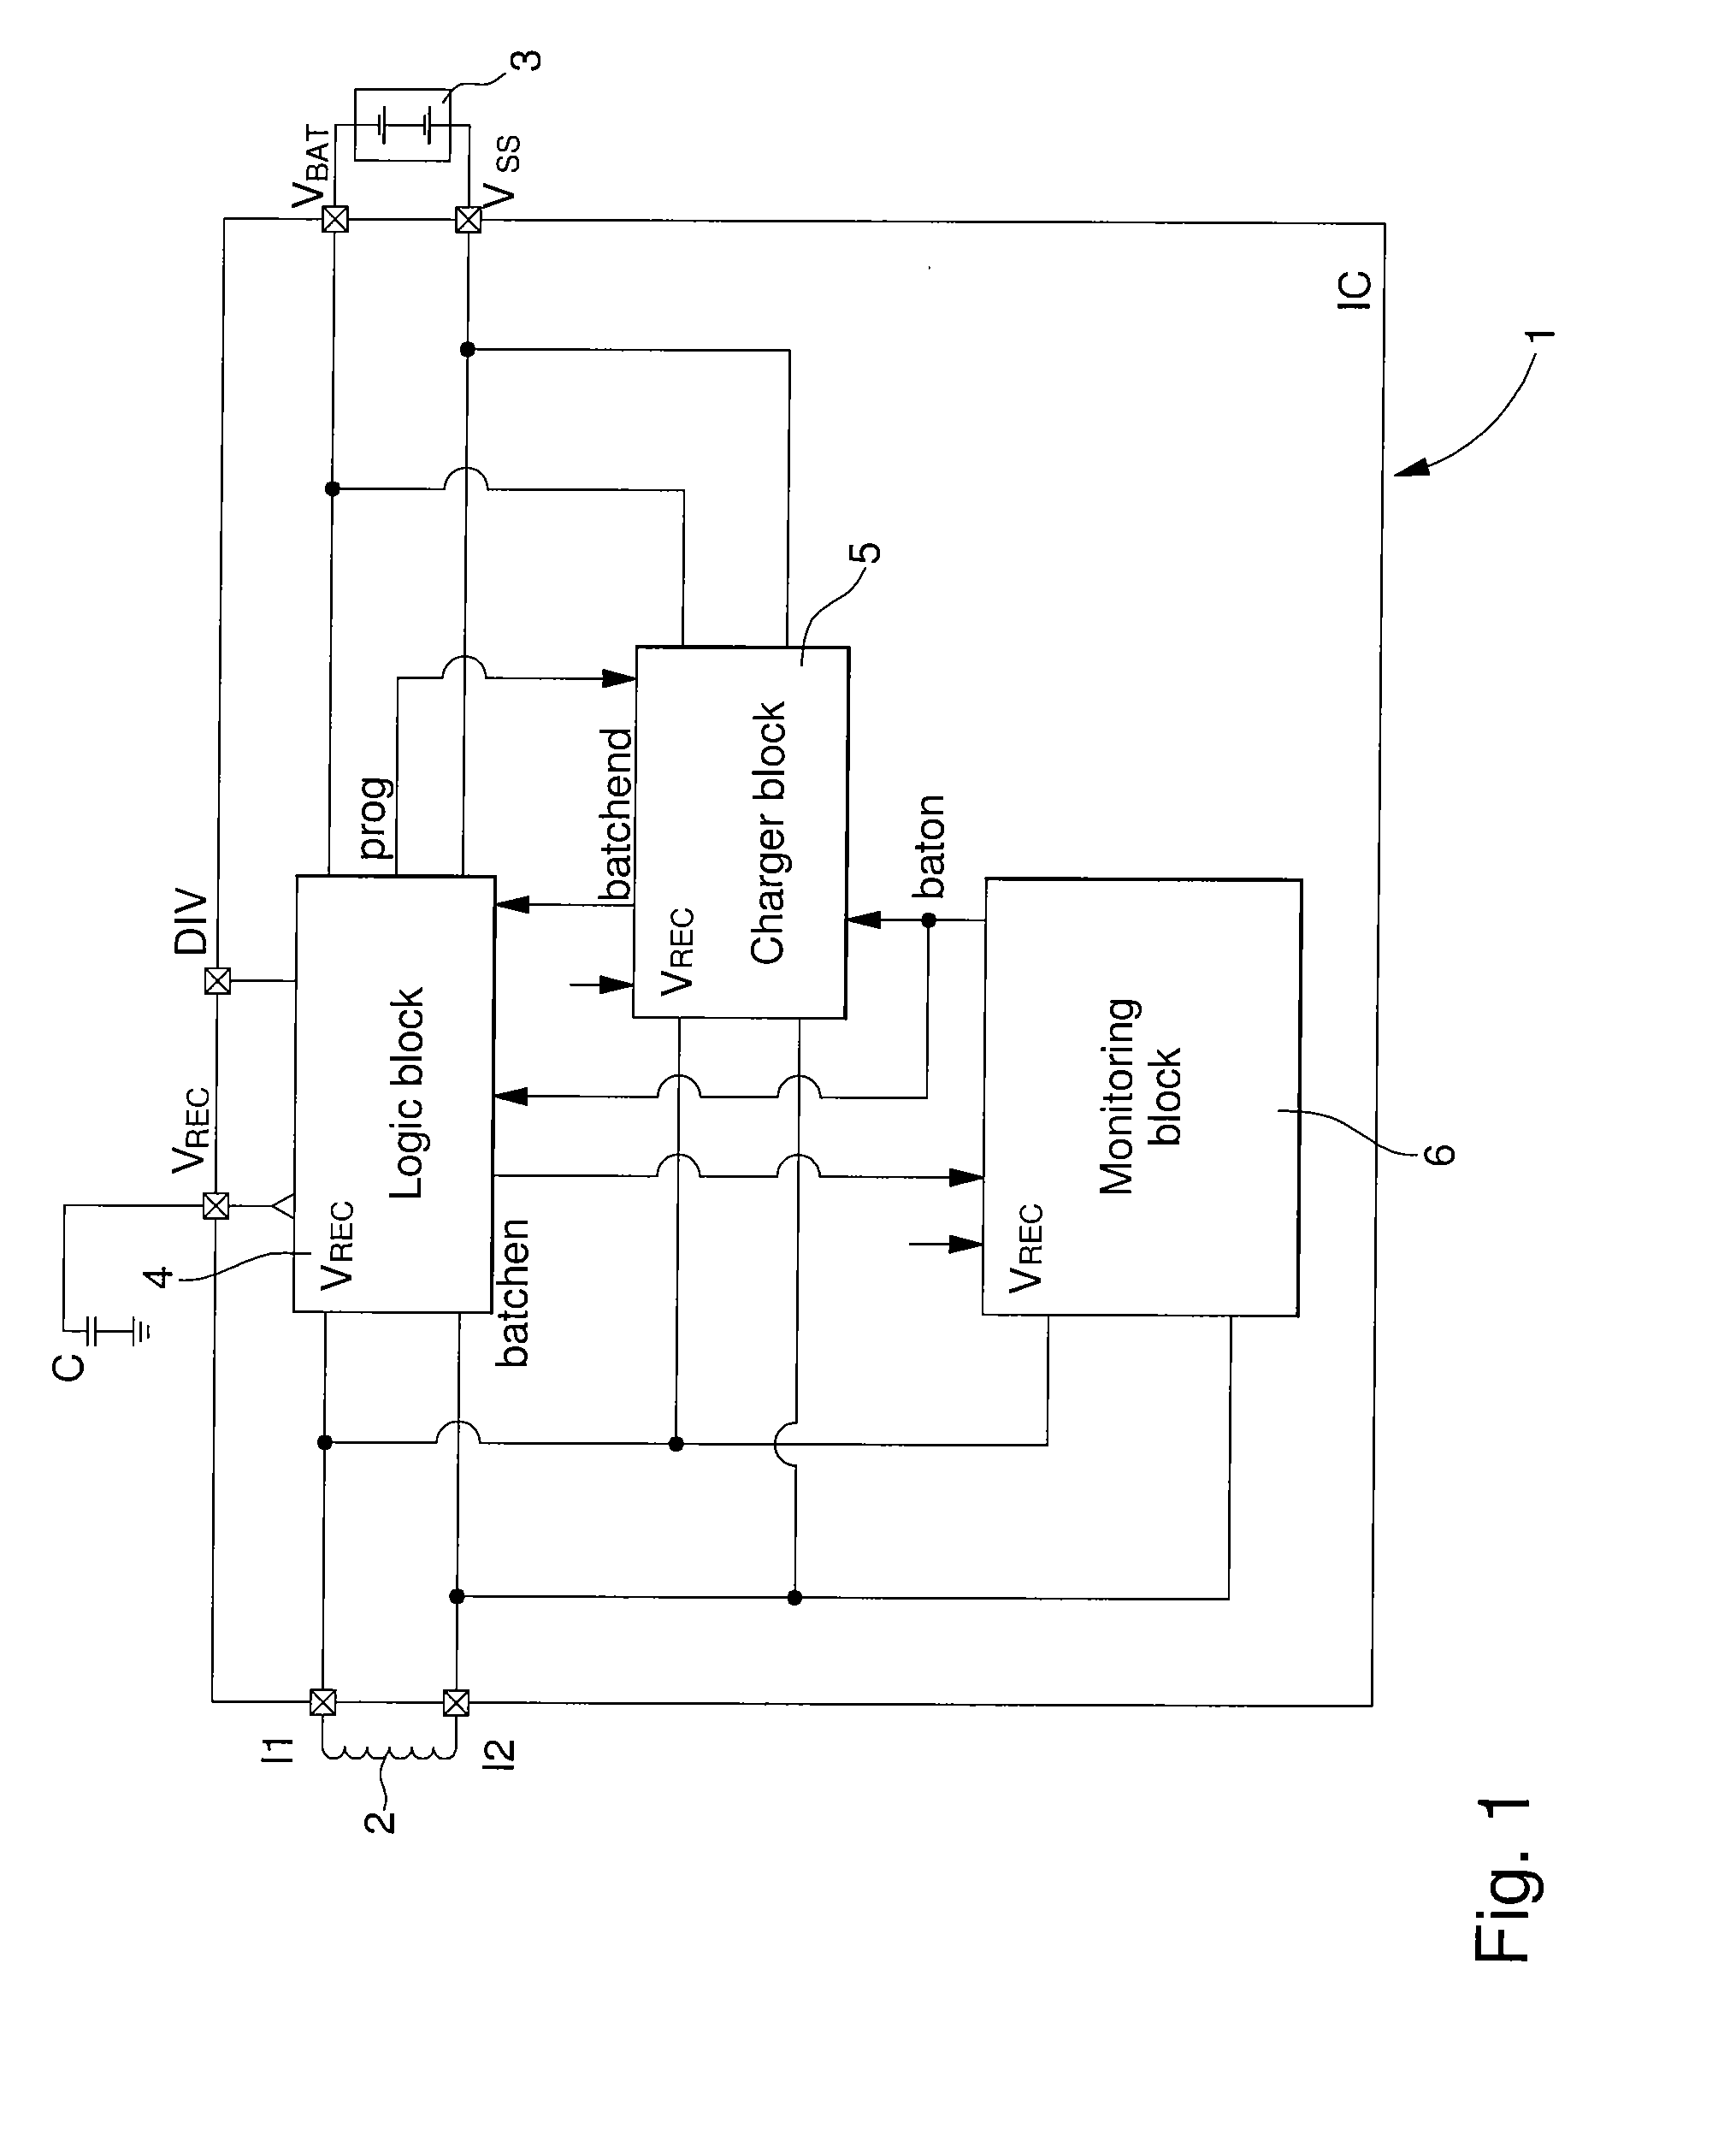 Battery charger operating "all or nothing" with a protective power supply circuit for monolithic integrated circuits using the antenna energy